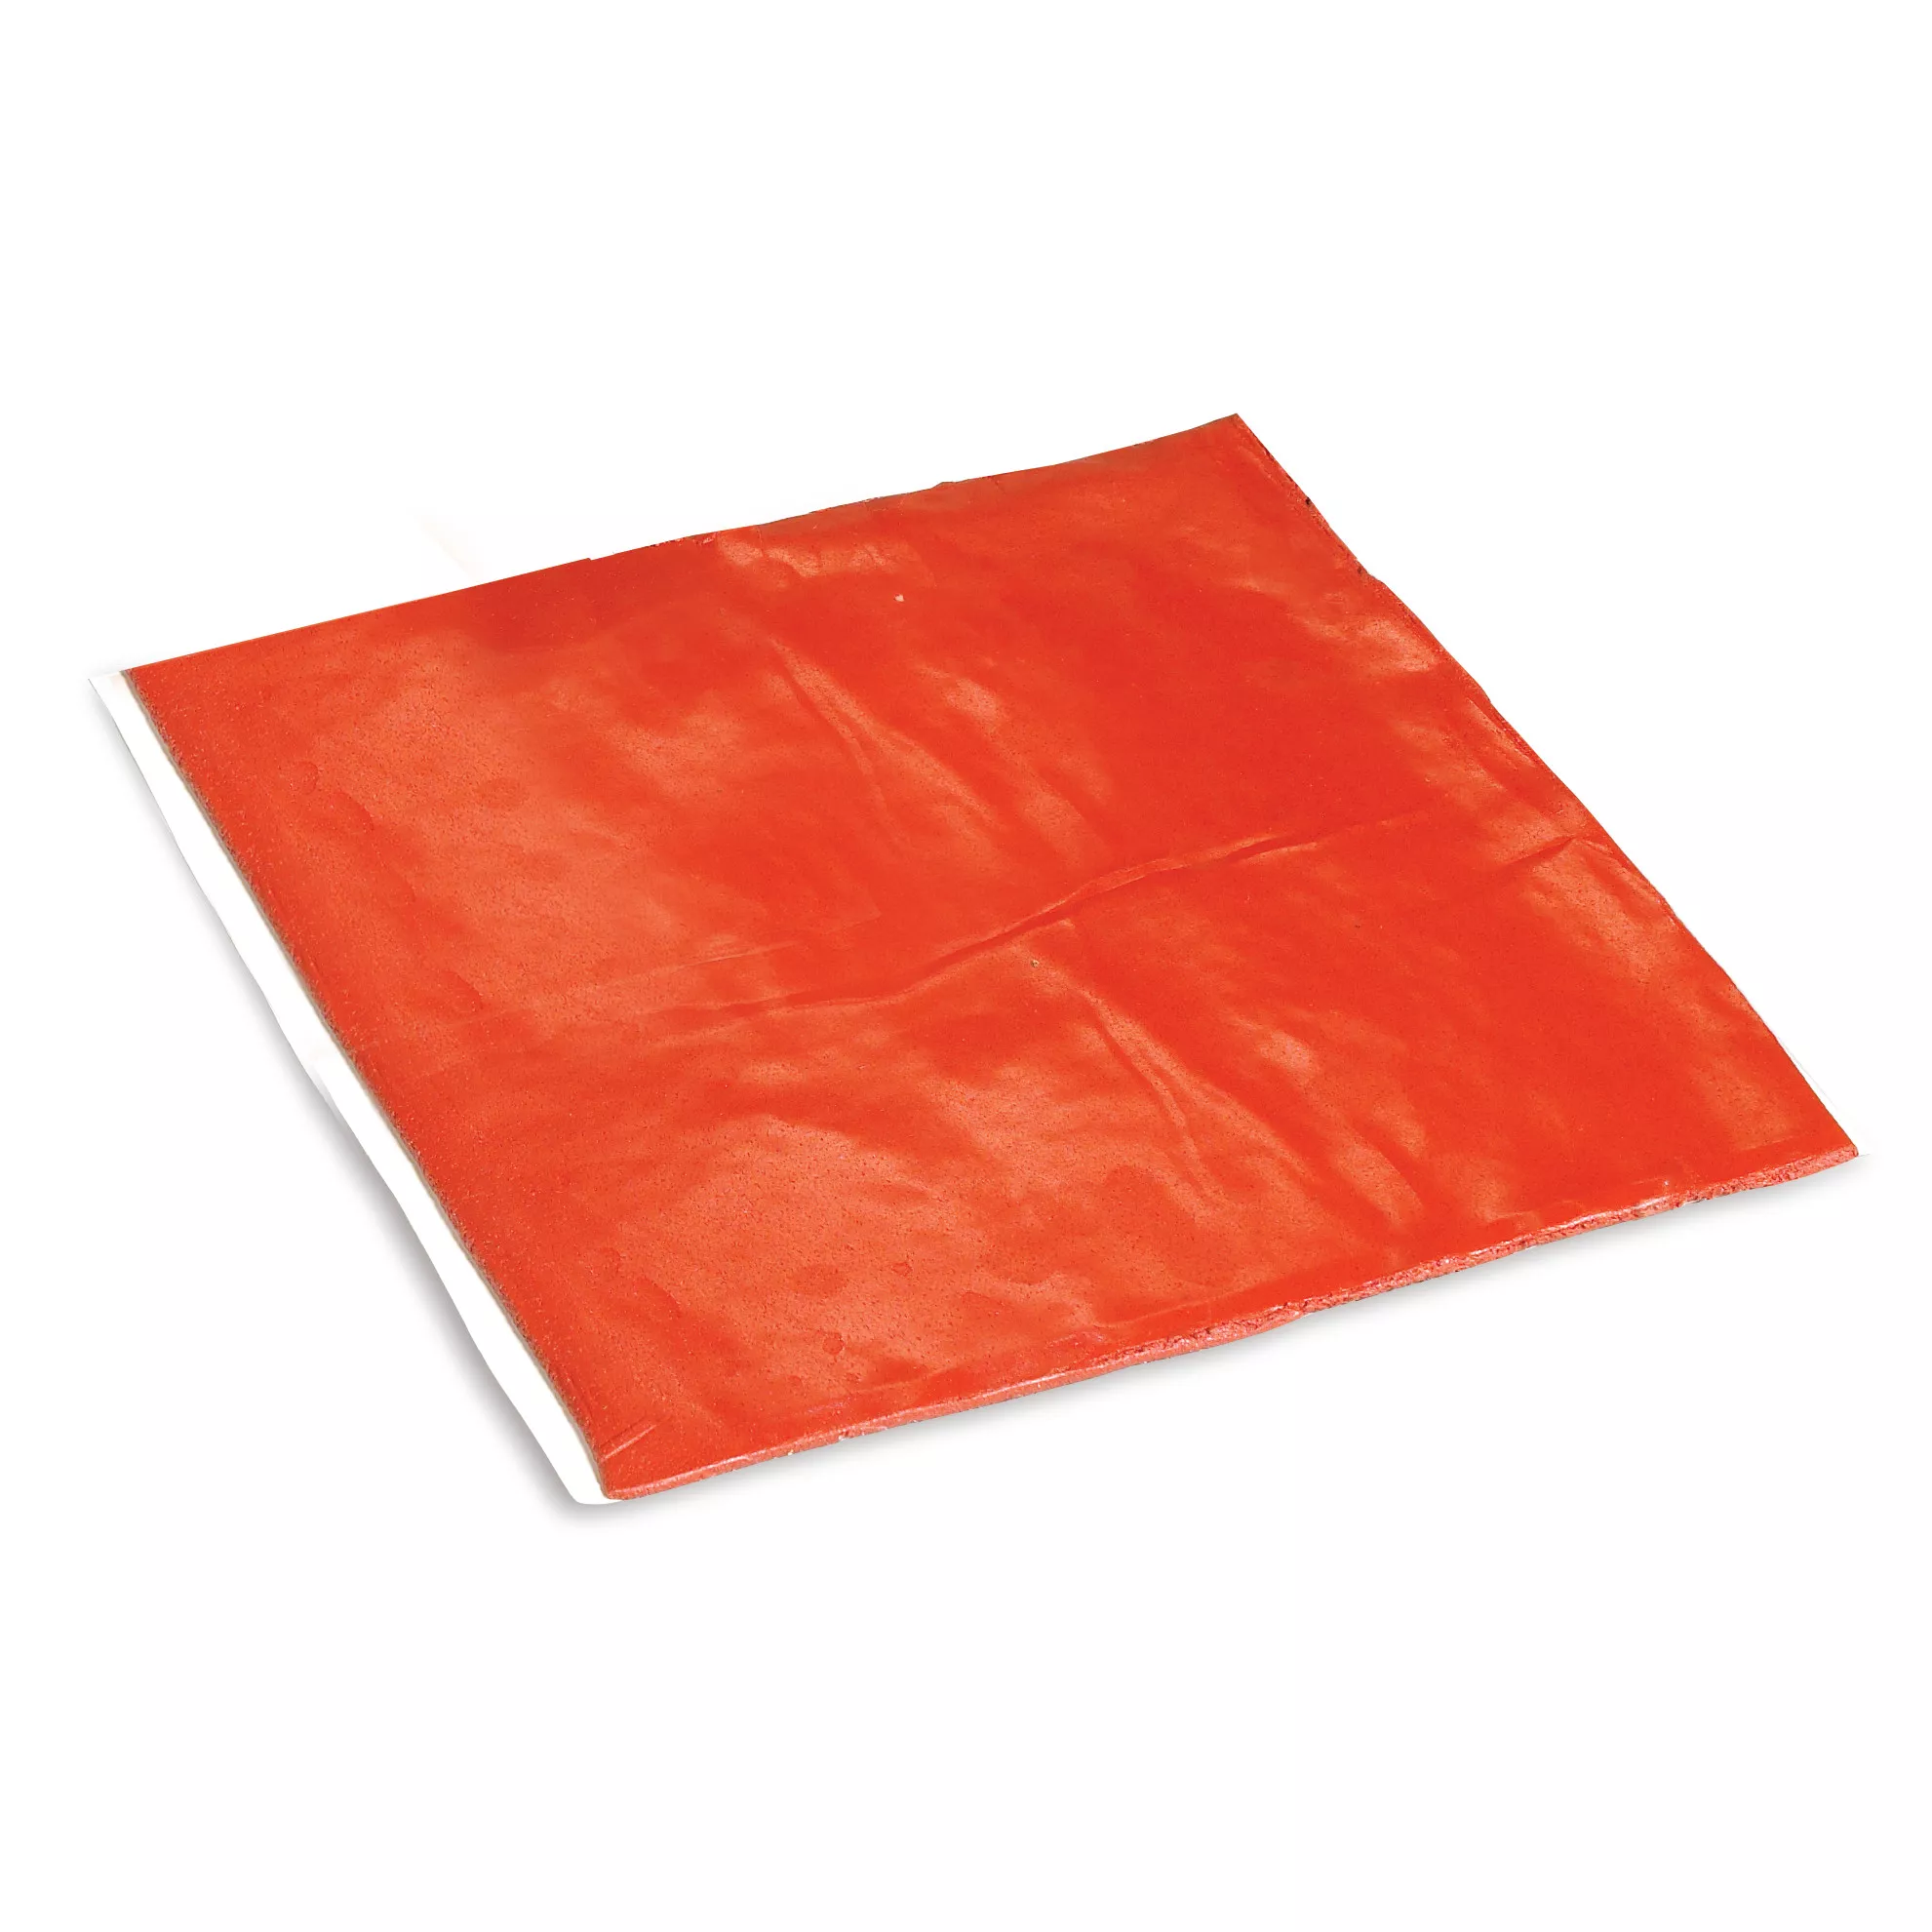 3M™ Fire Barrier Moldable Putty Pads MPP+, Red, 9.5 in x 9.5 in, 20
Each/Case